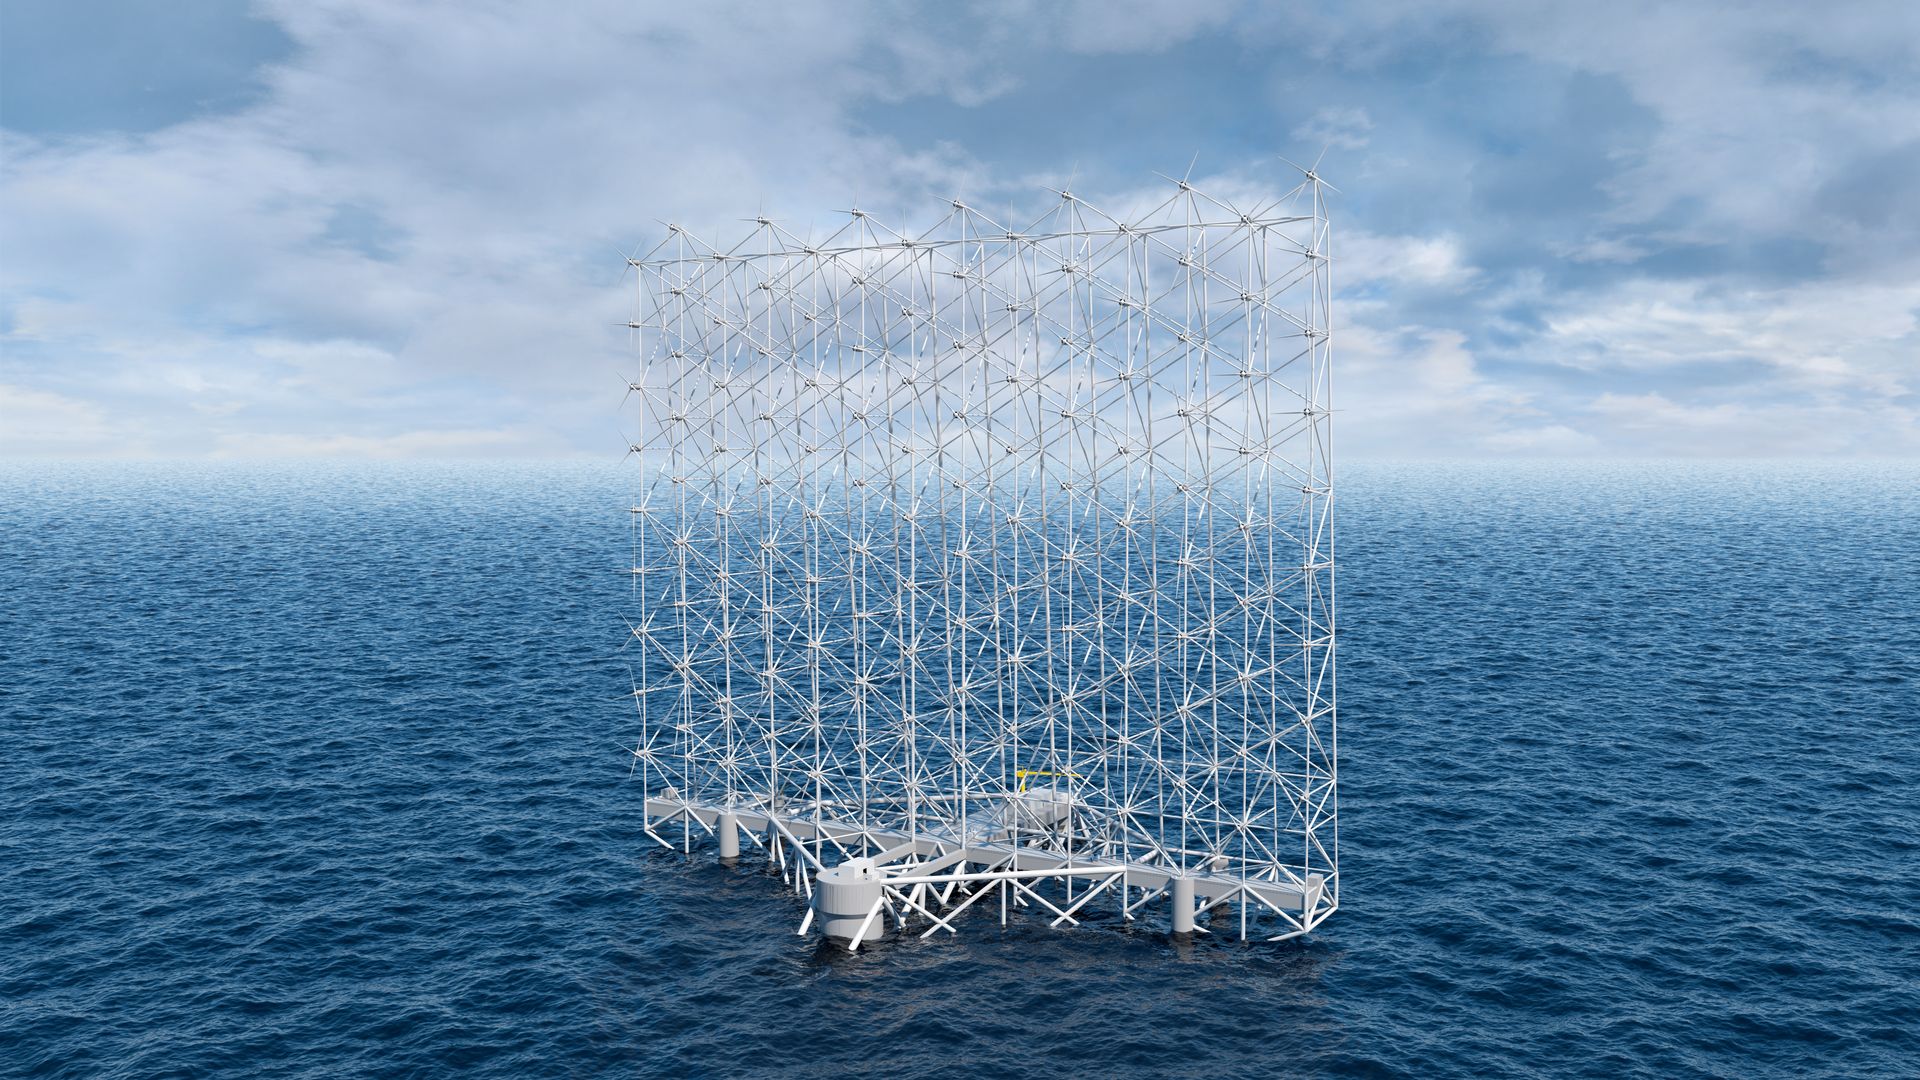 Image of the Wind Catching Systems grid-based offshore wind design.